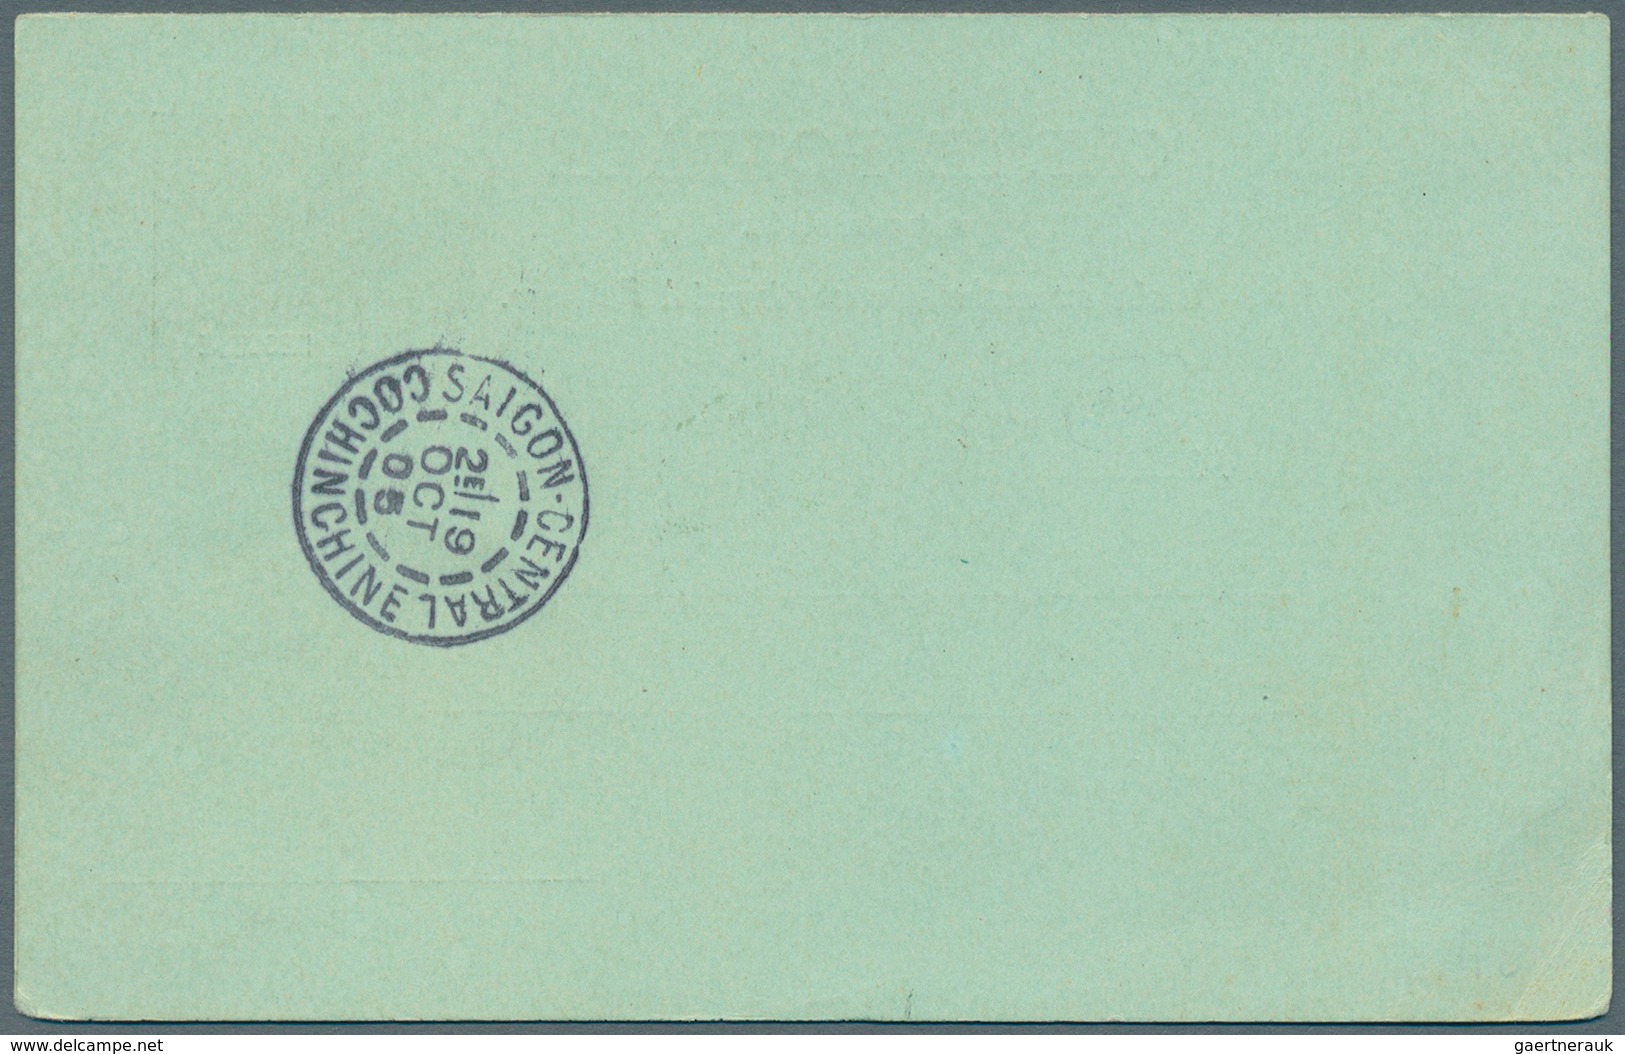 Laos: 1905, Used Indochina Postal Stationery Double Card (1892 Issue) From BASSAC, LAOS To Rennes, F - Laos